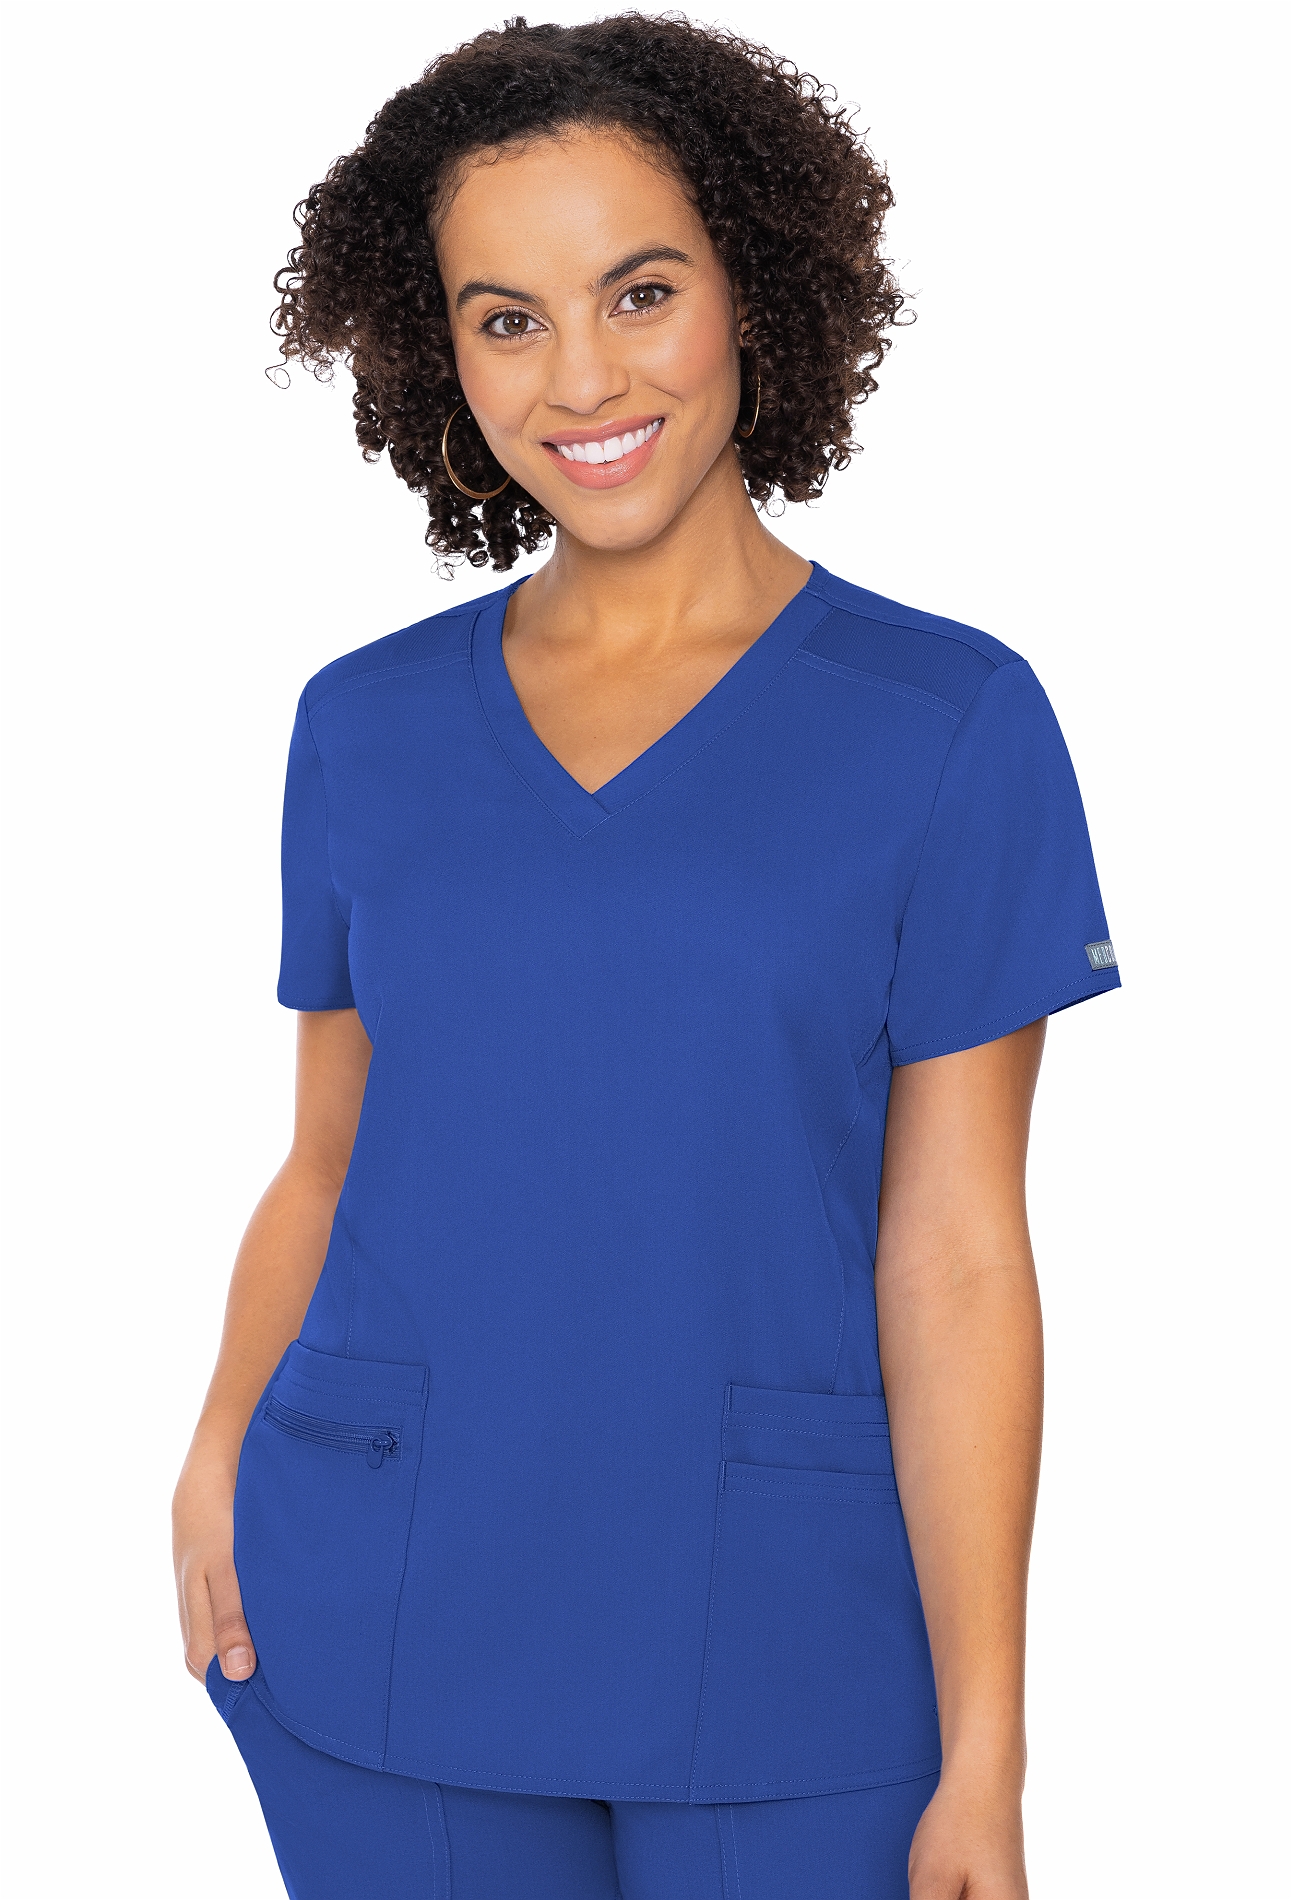 Med Couture Touch Women's 4 Pocket Top-MC7468 | Medical Scrubs Collection